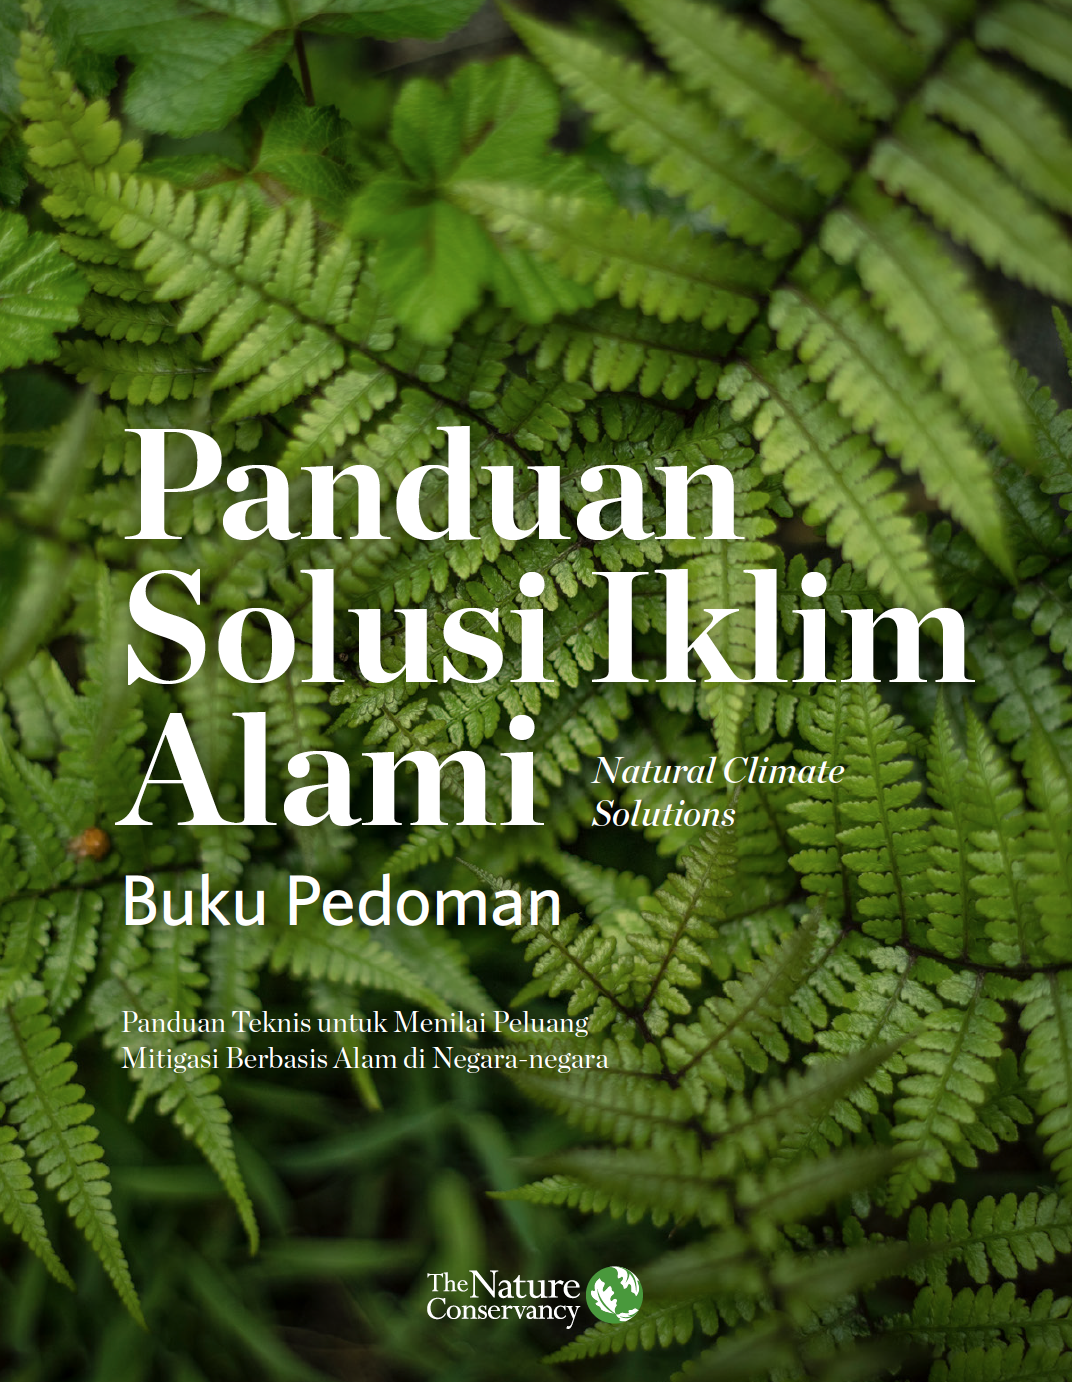 Text that says Natural Climate Solutions Handbook in Indonesian with micro shot of ferns.